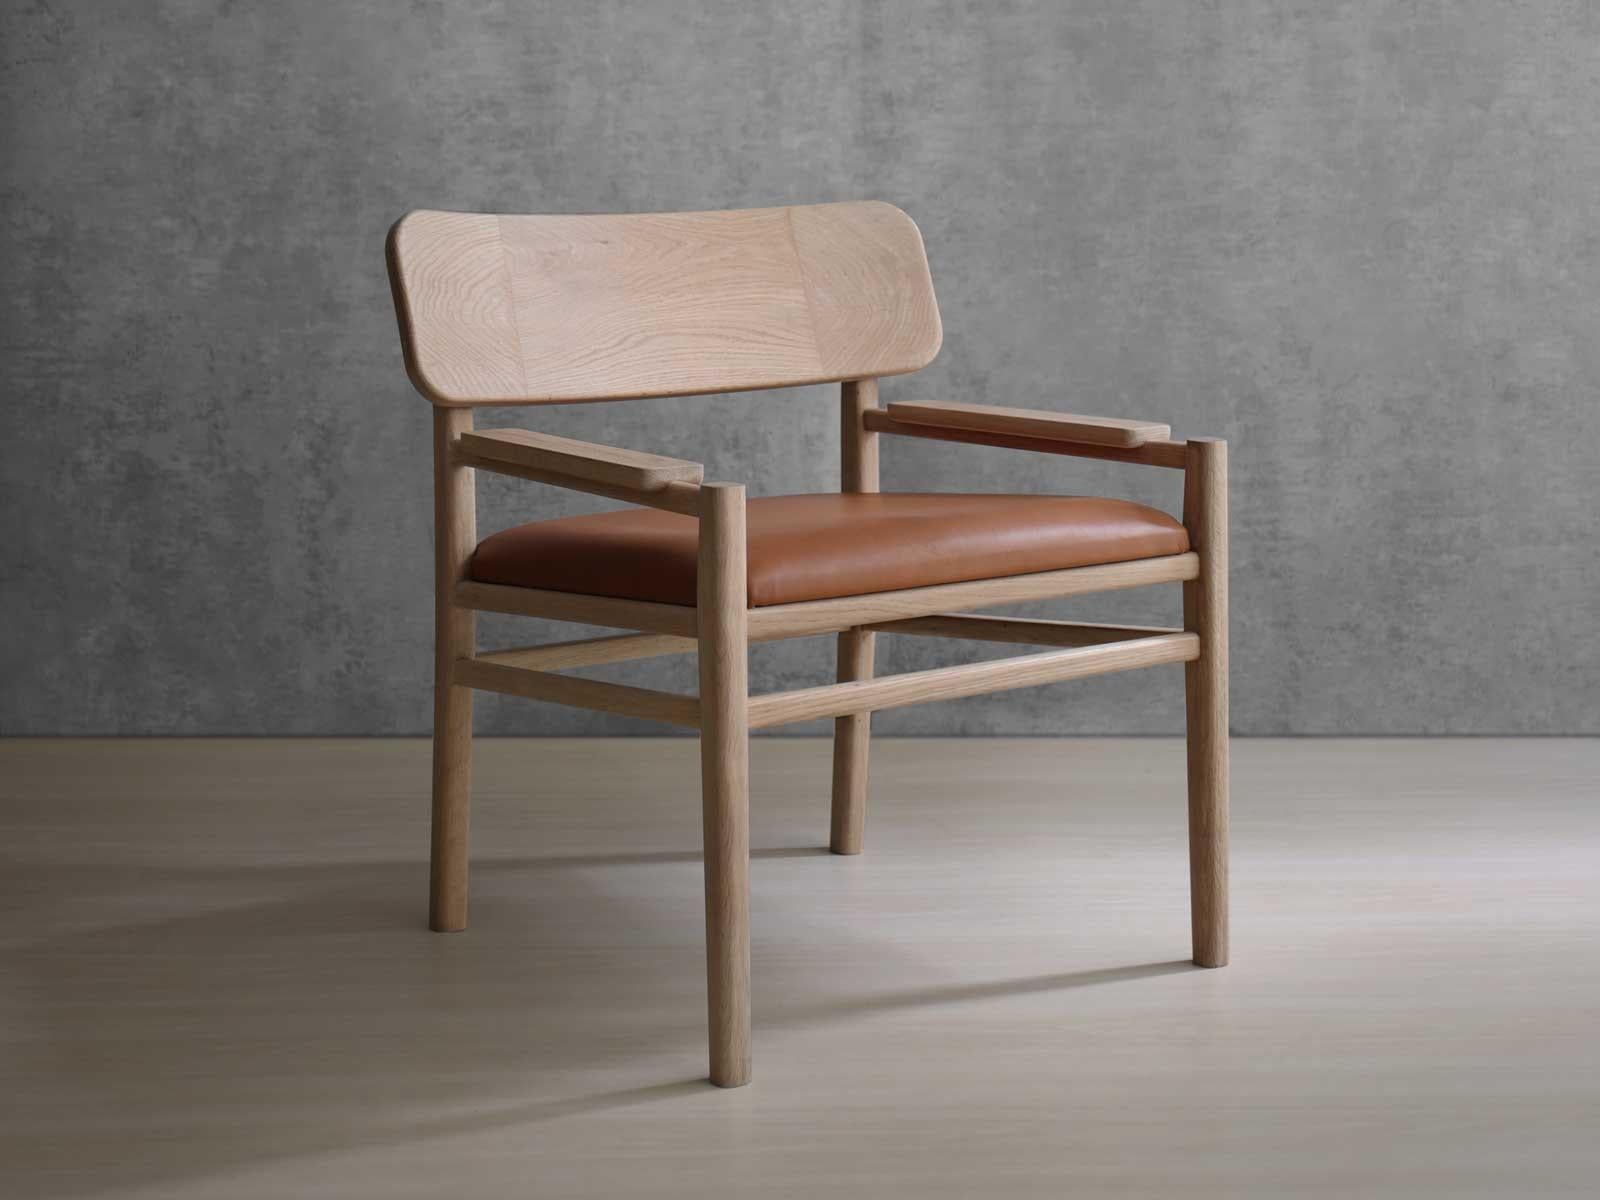 The XVI Sixteenth Chair is part of Noviembre collection, which offers a compelling range of furniture, inviting exploration of form, function, and the serene lines that define each piece. Inspired by Constantin Brancusi's artistic philosophy, the